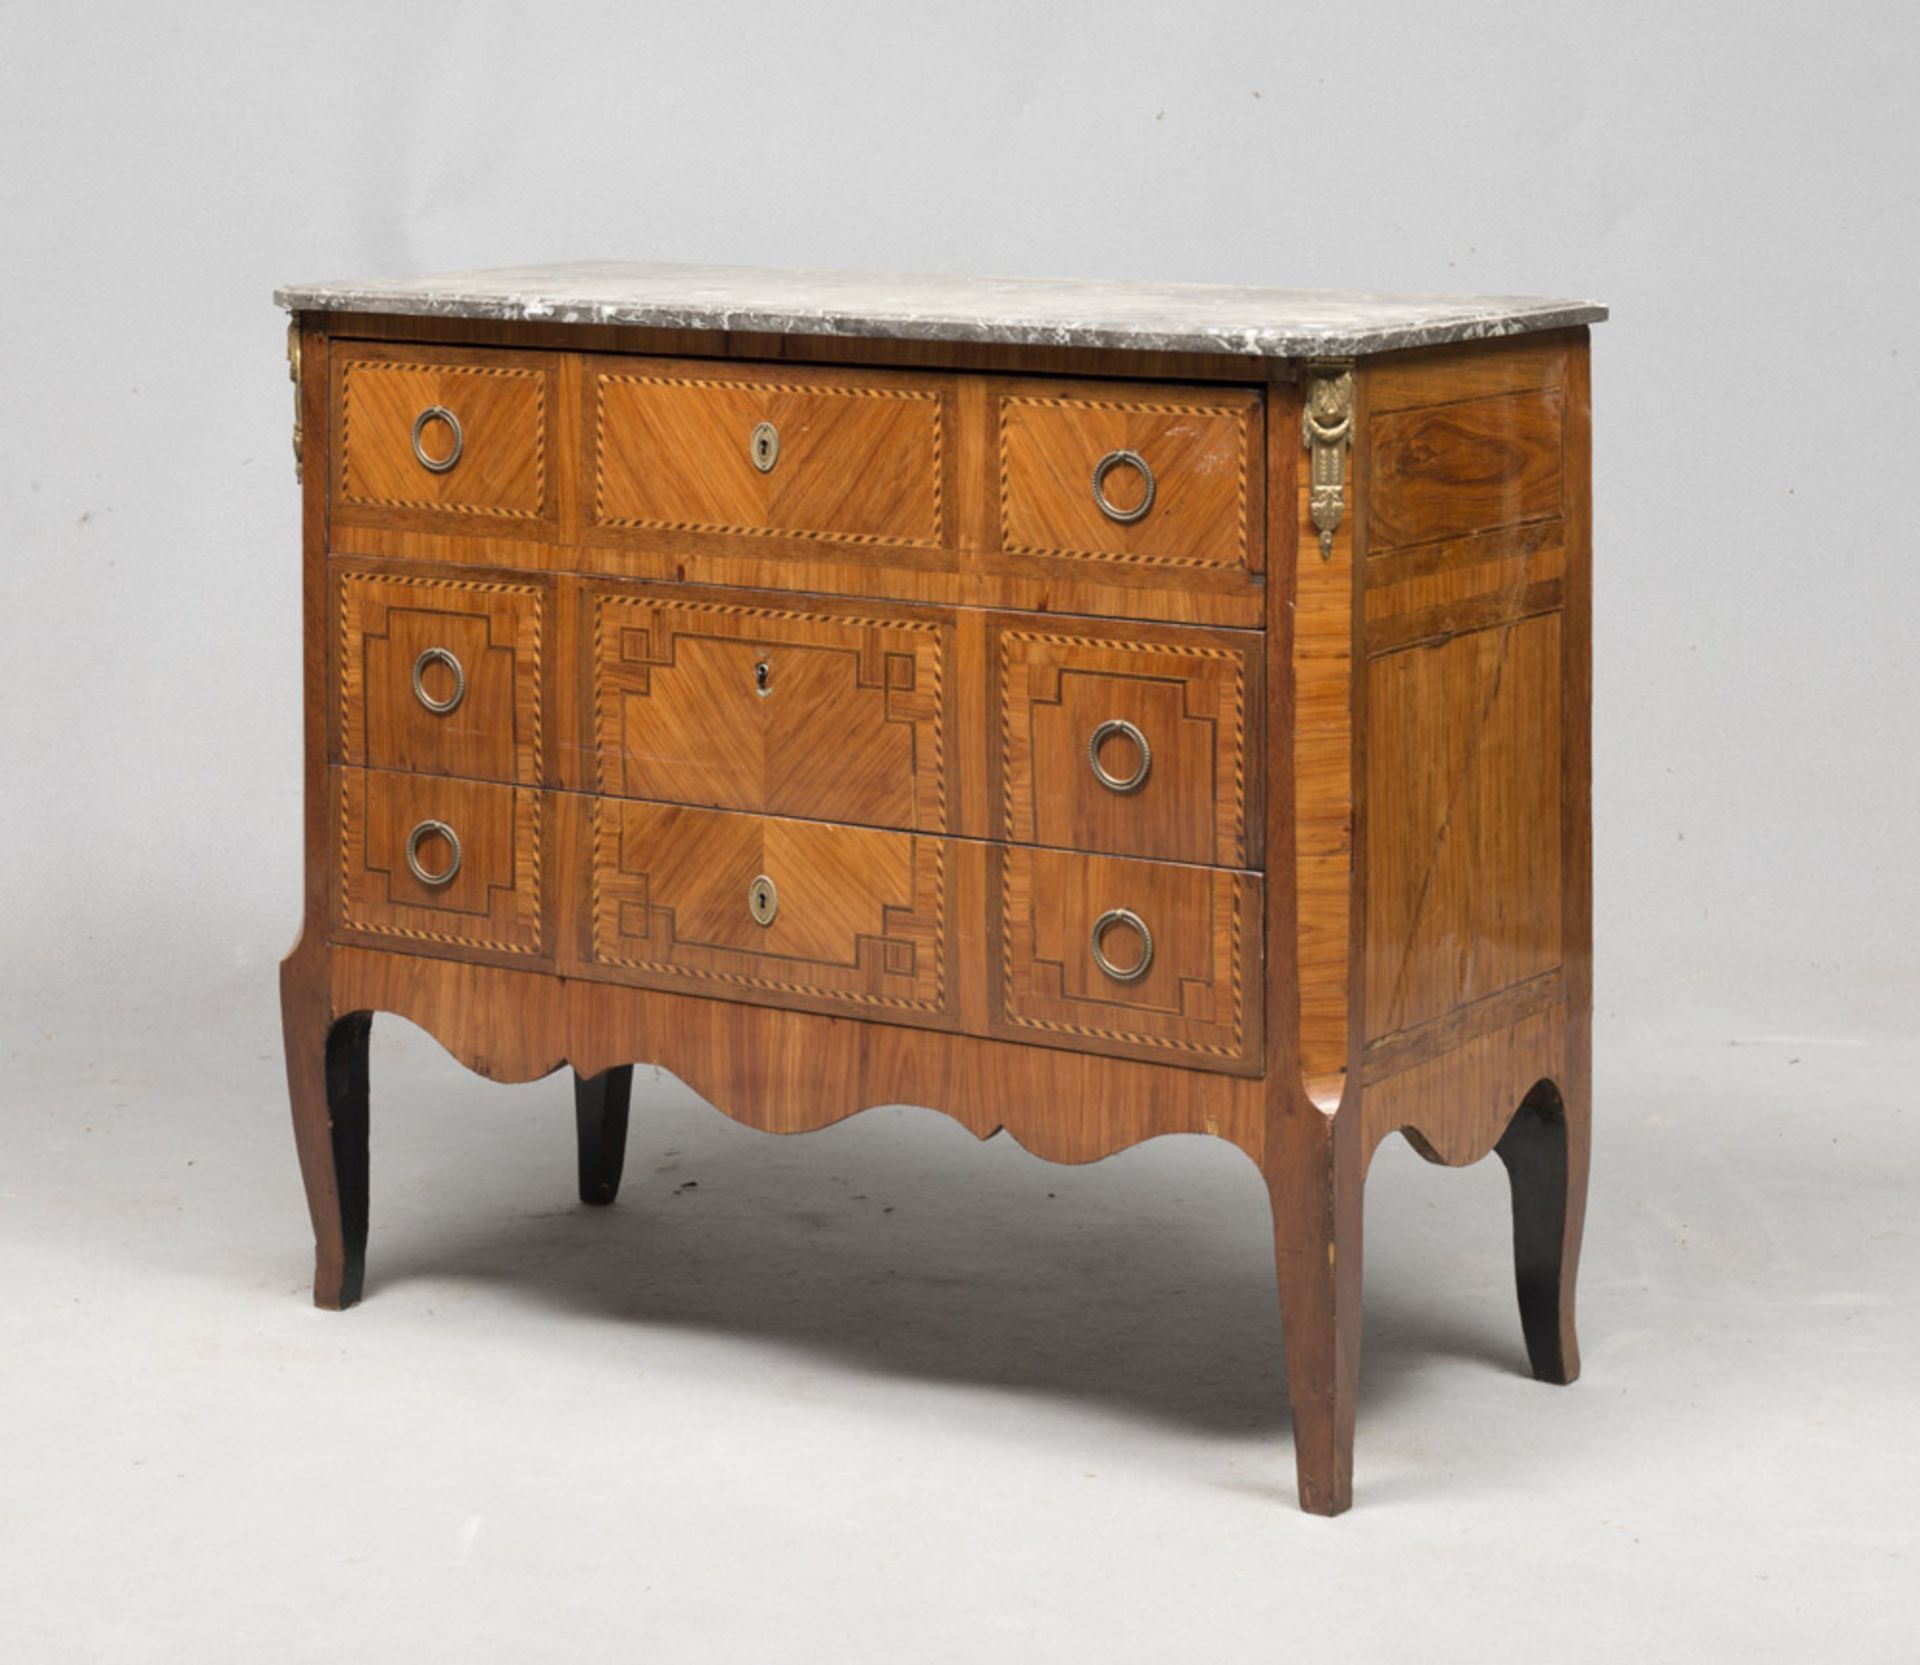 BEAUTIFUL COMMODE IN ROSEWOOD, FRANCE TRANSITION PERIOD with reserves and threading in violet wood